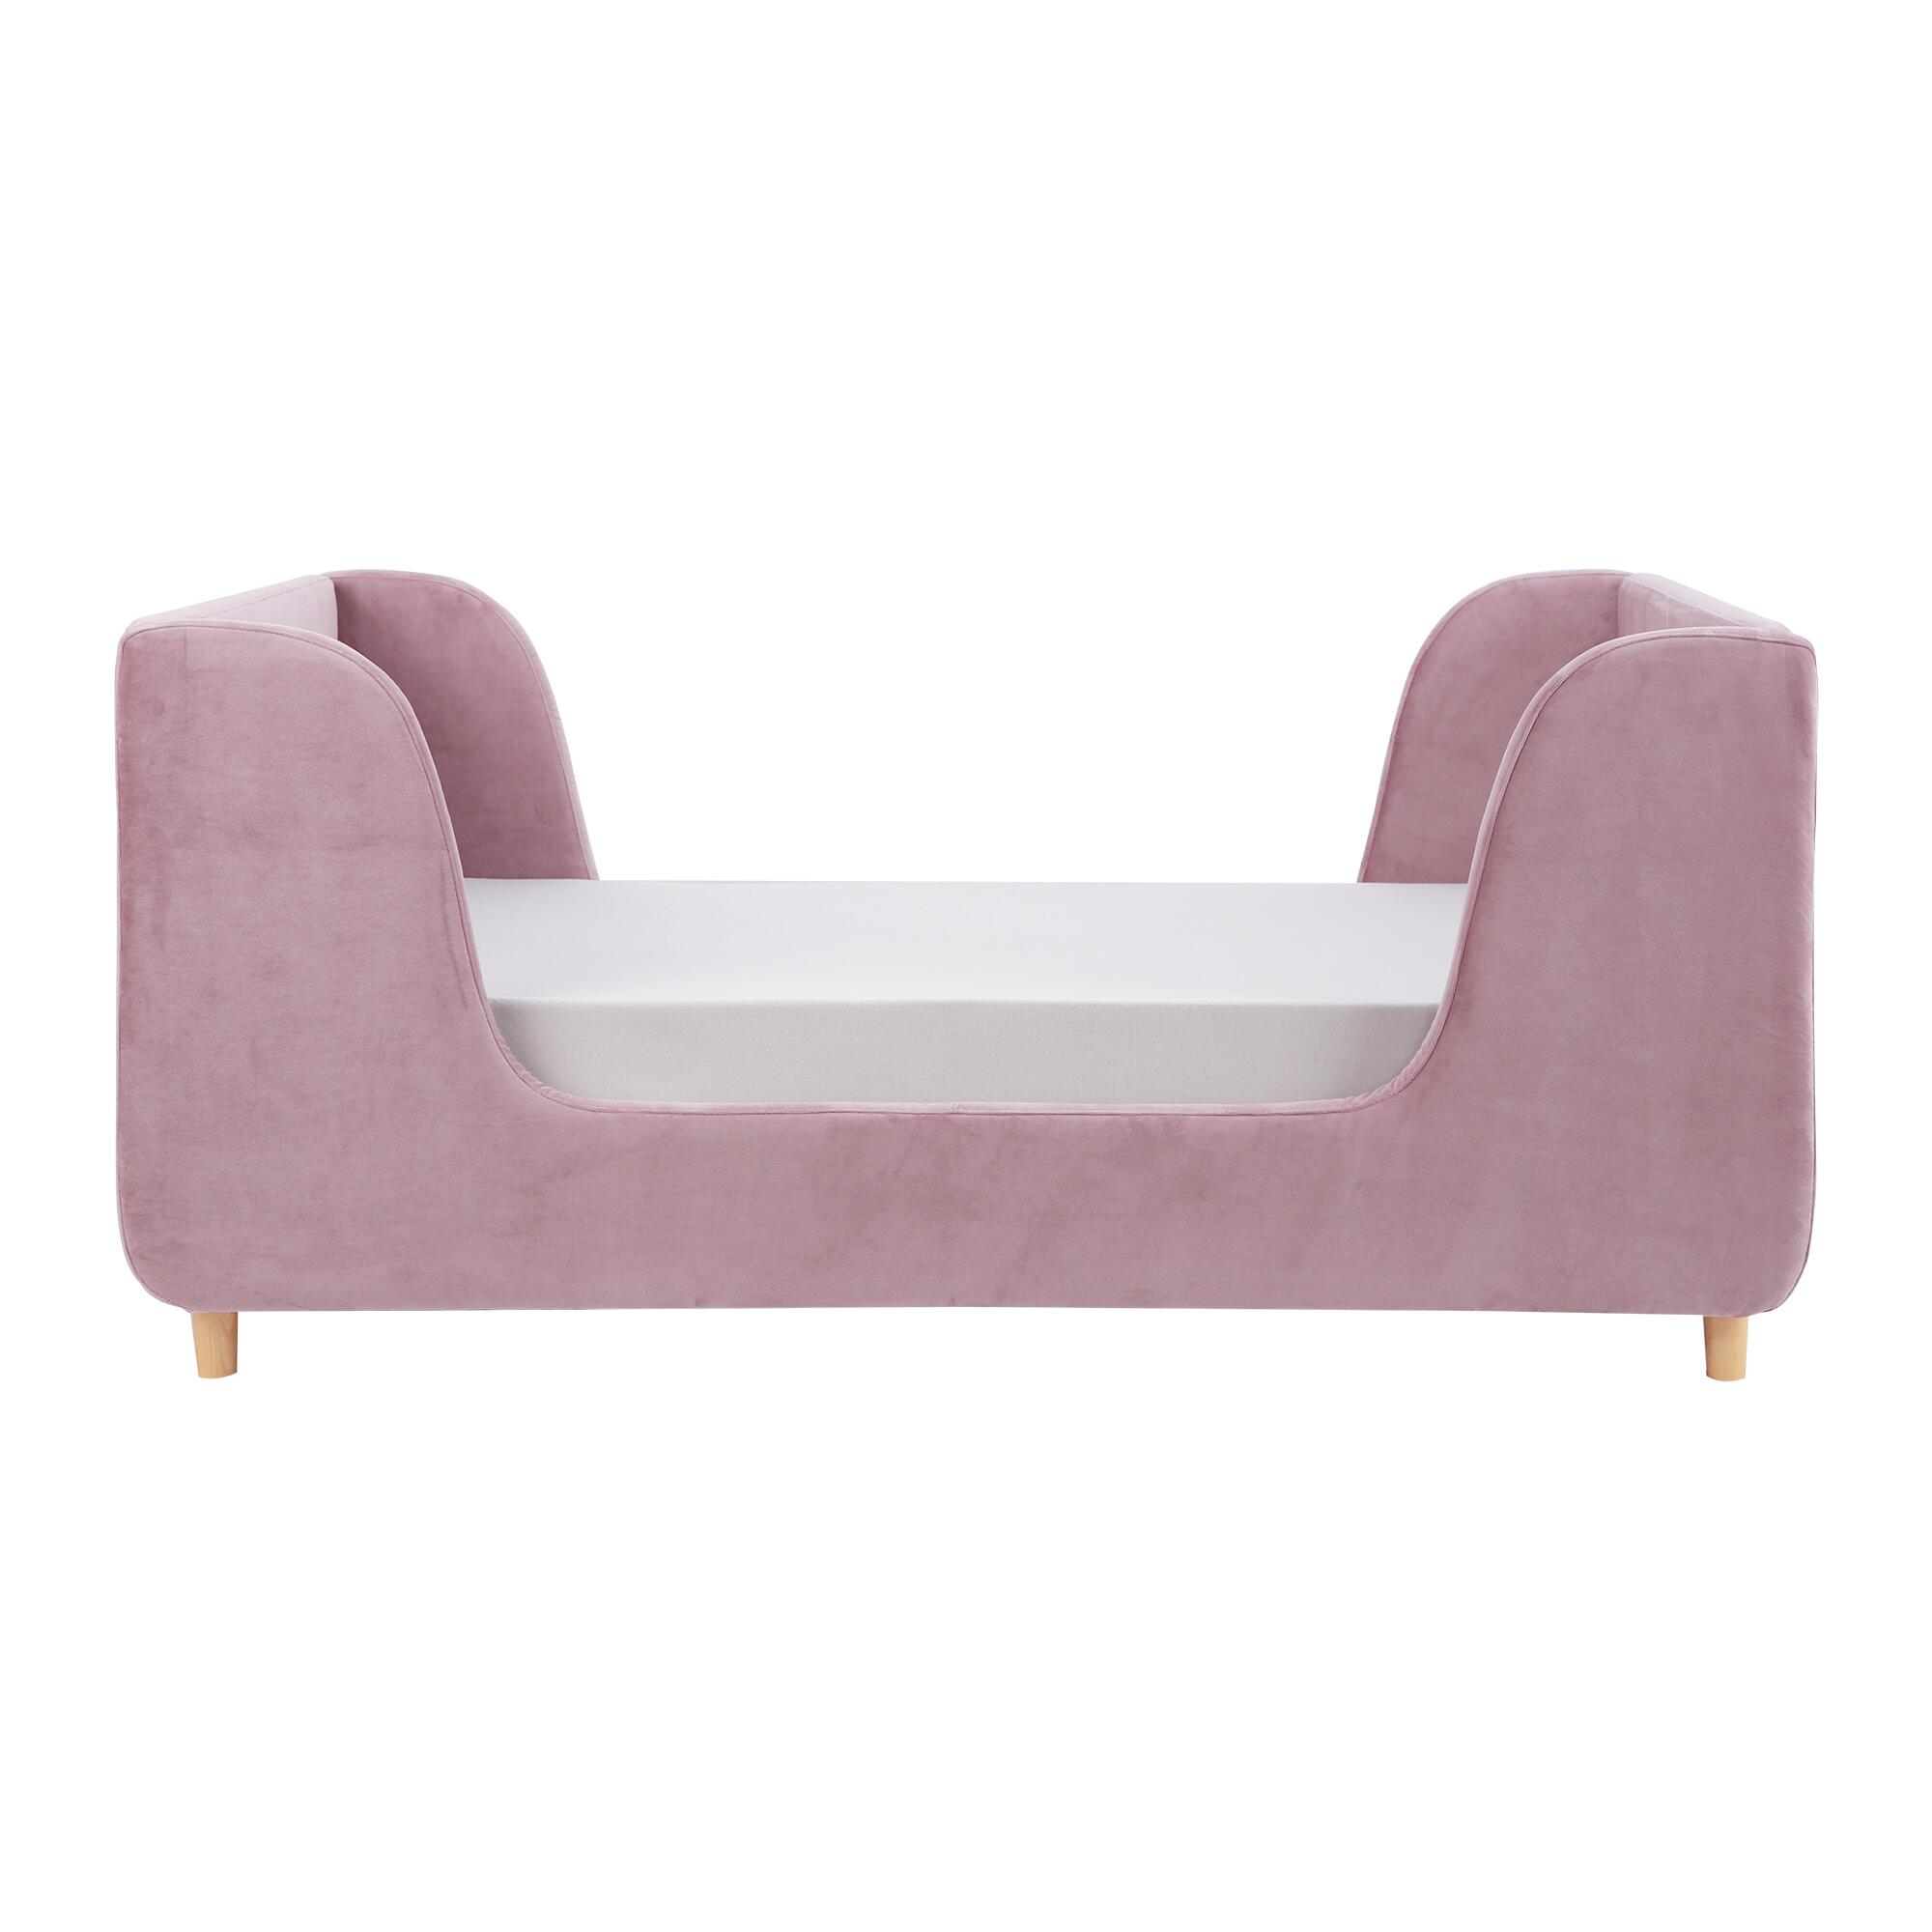 Lumi Toddler Bed - Dusty Pink